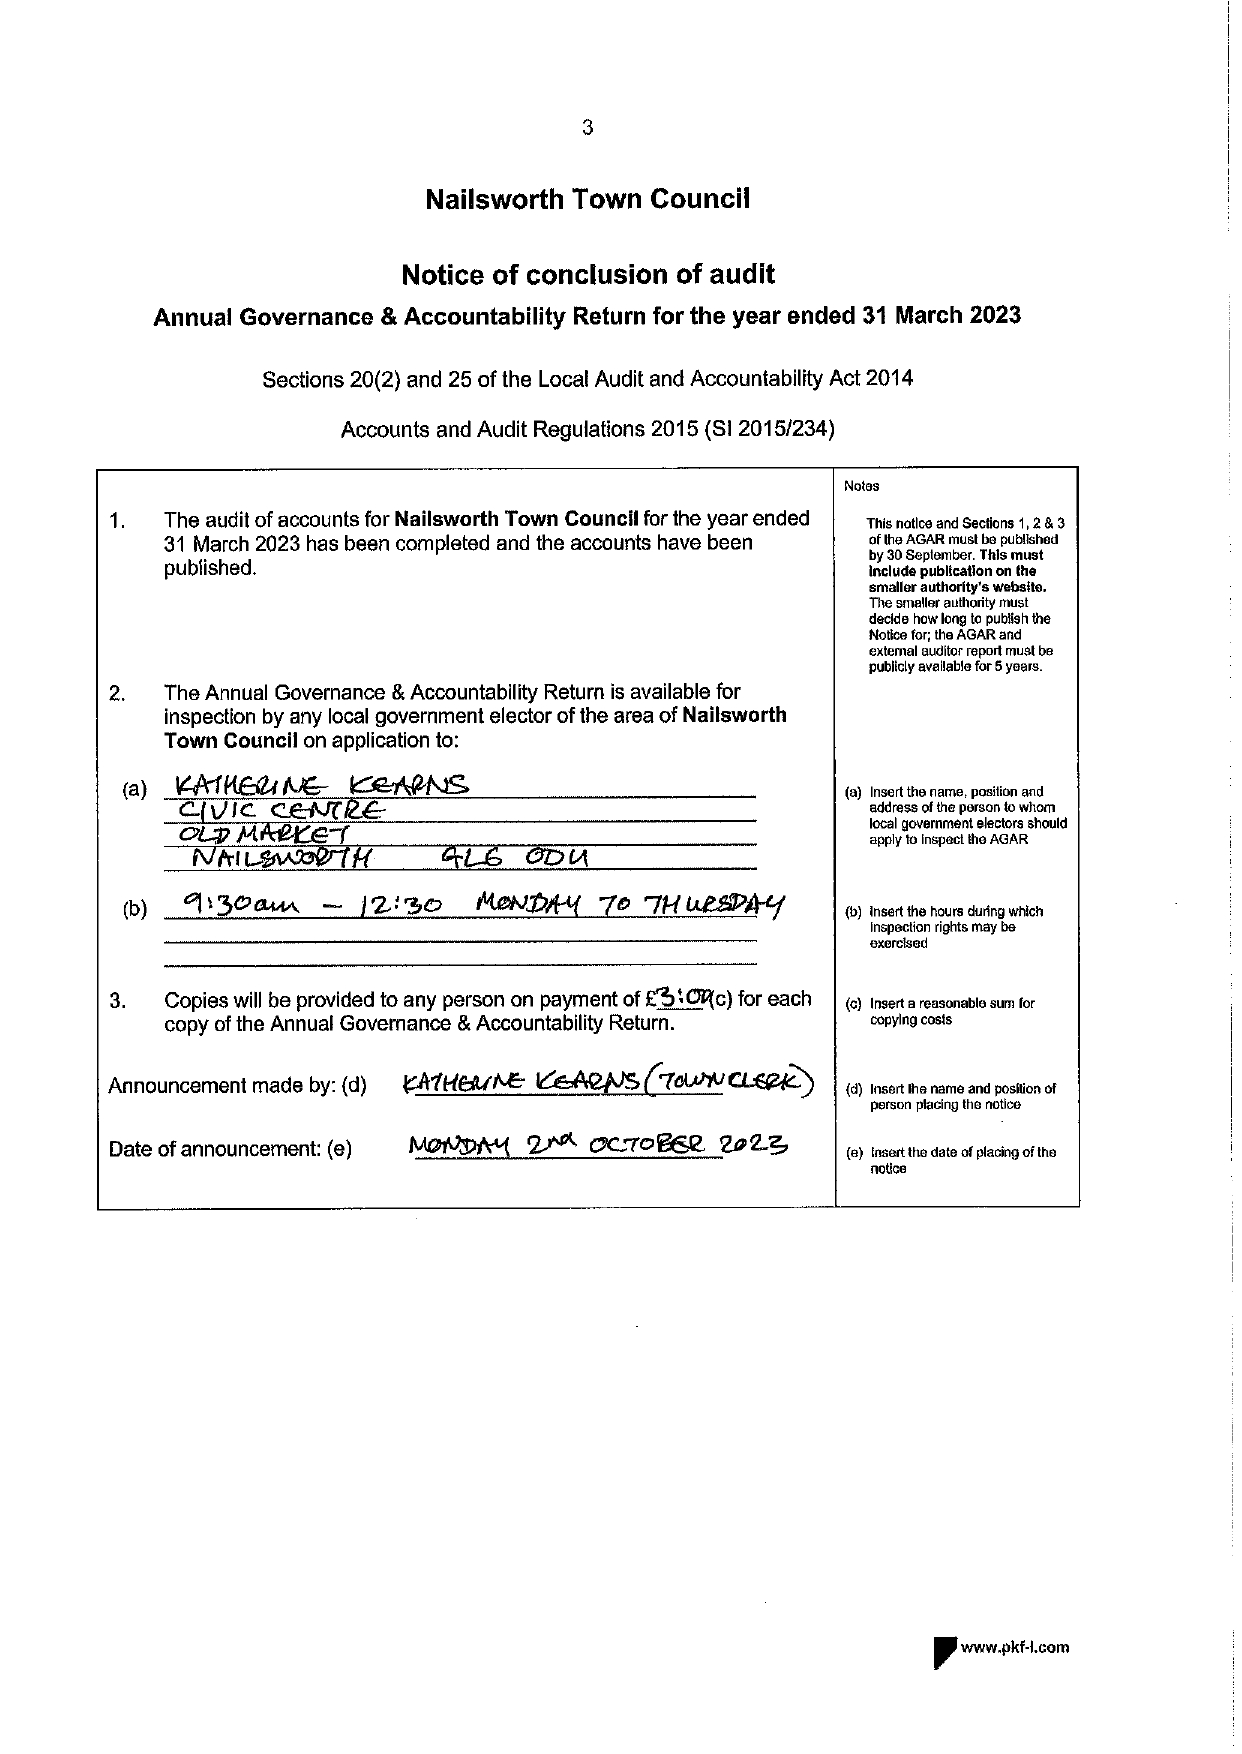 Notice of Conclusion of Audit 2023_page-0001 (1).jpg